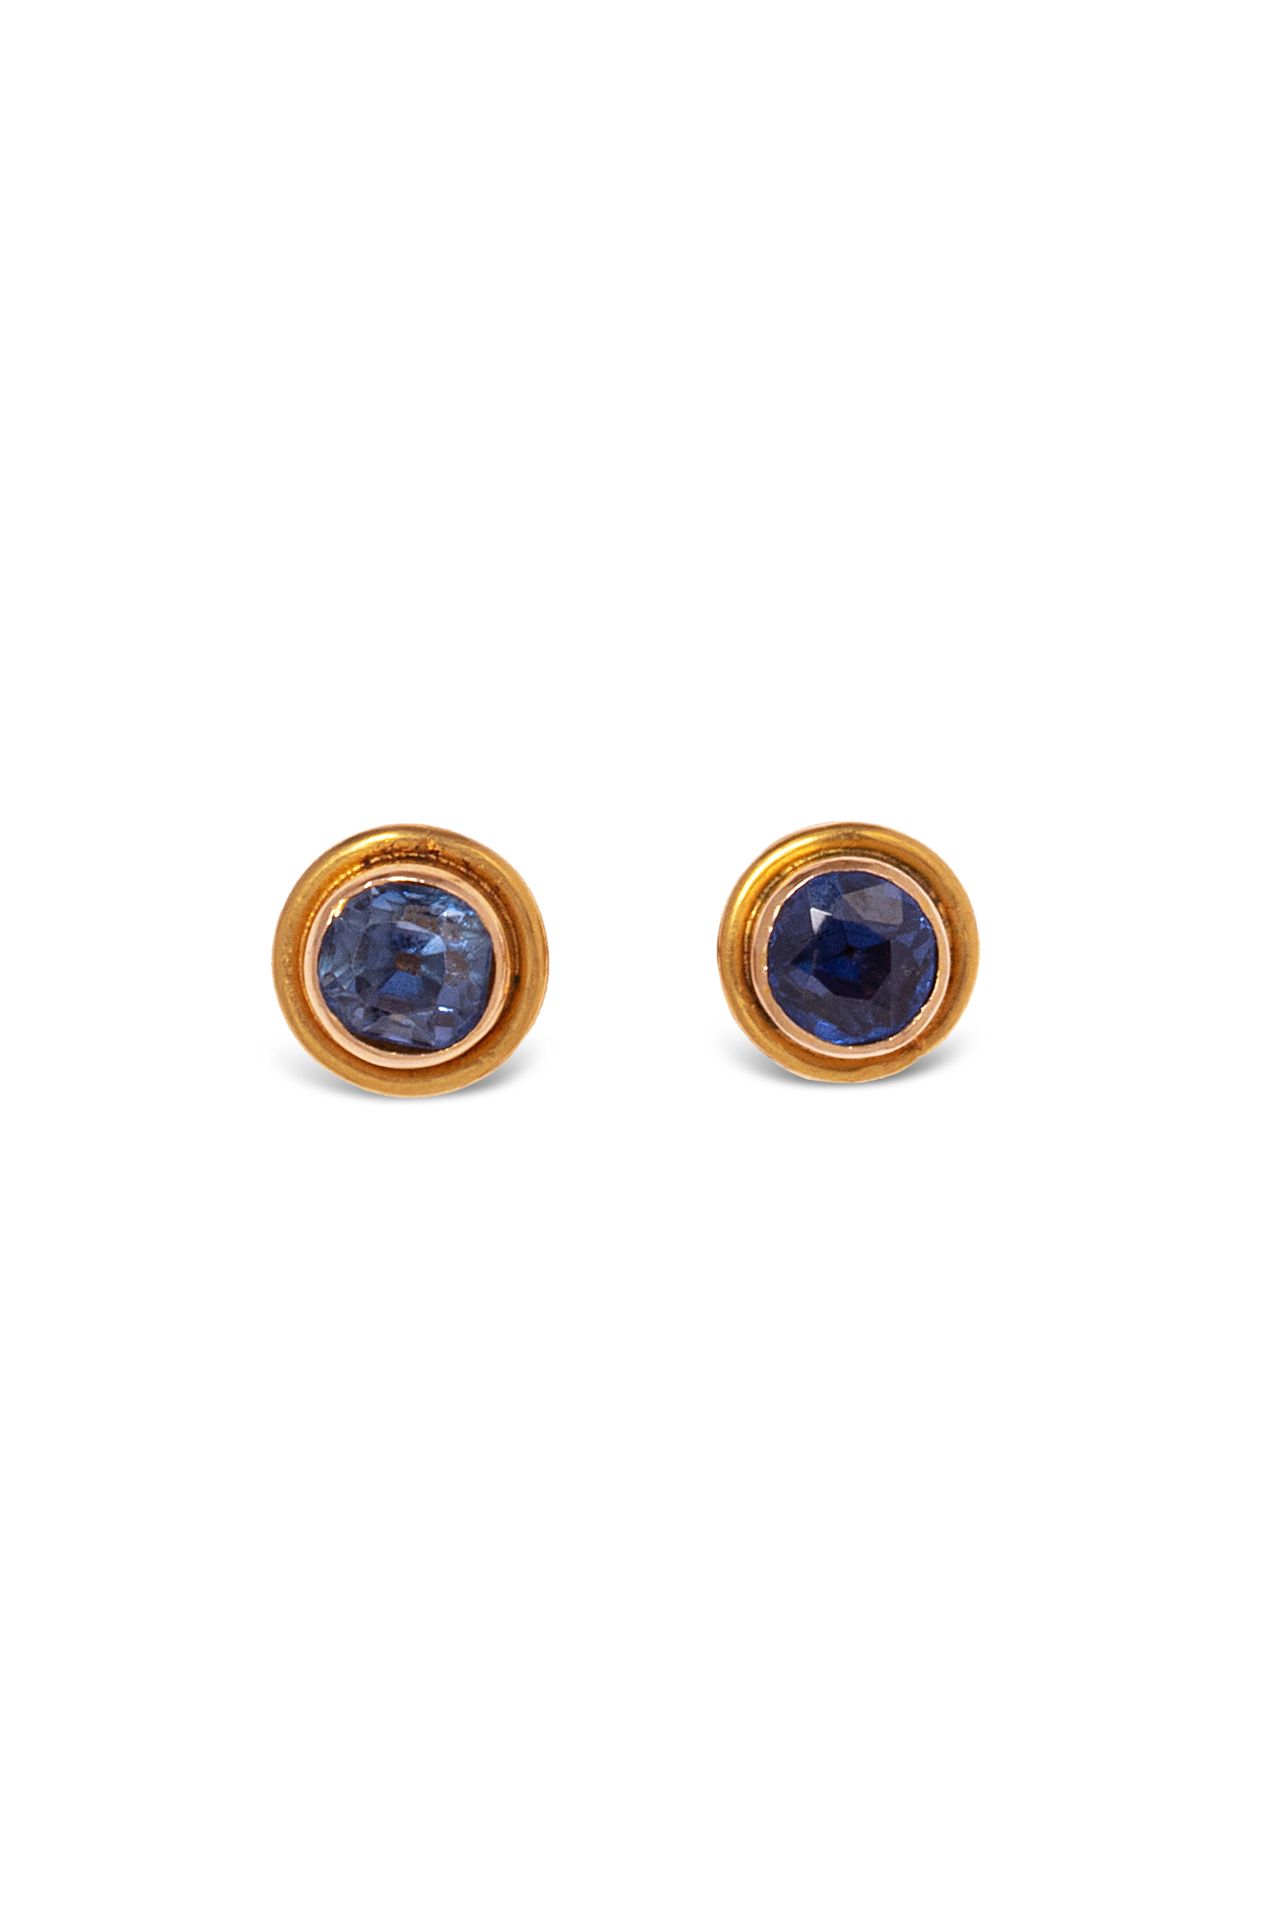 Null Pair of 18K (750) yellow gold collar buttons set with round sapphires.

Cir&hellip;